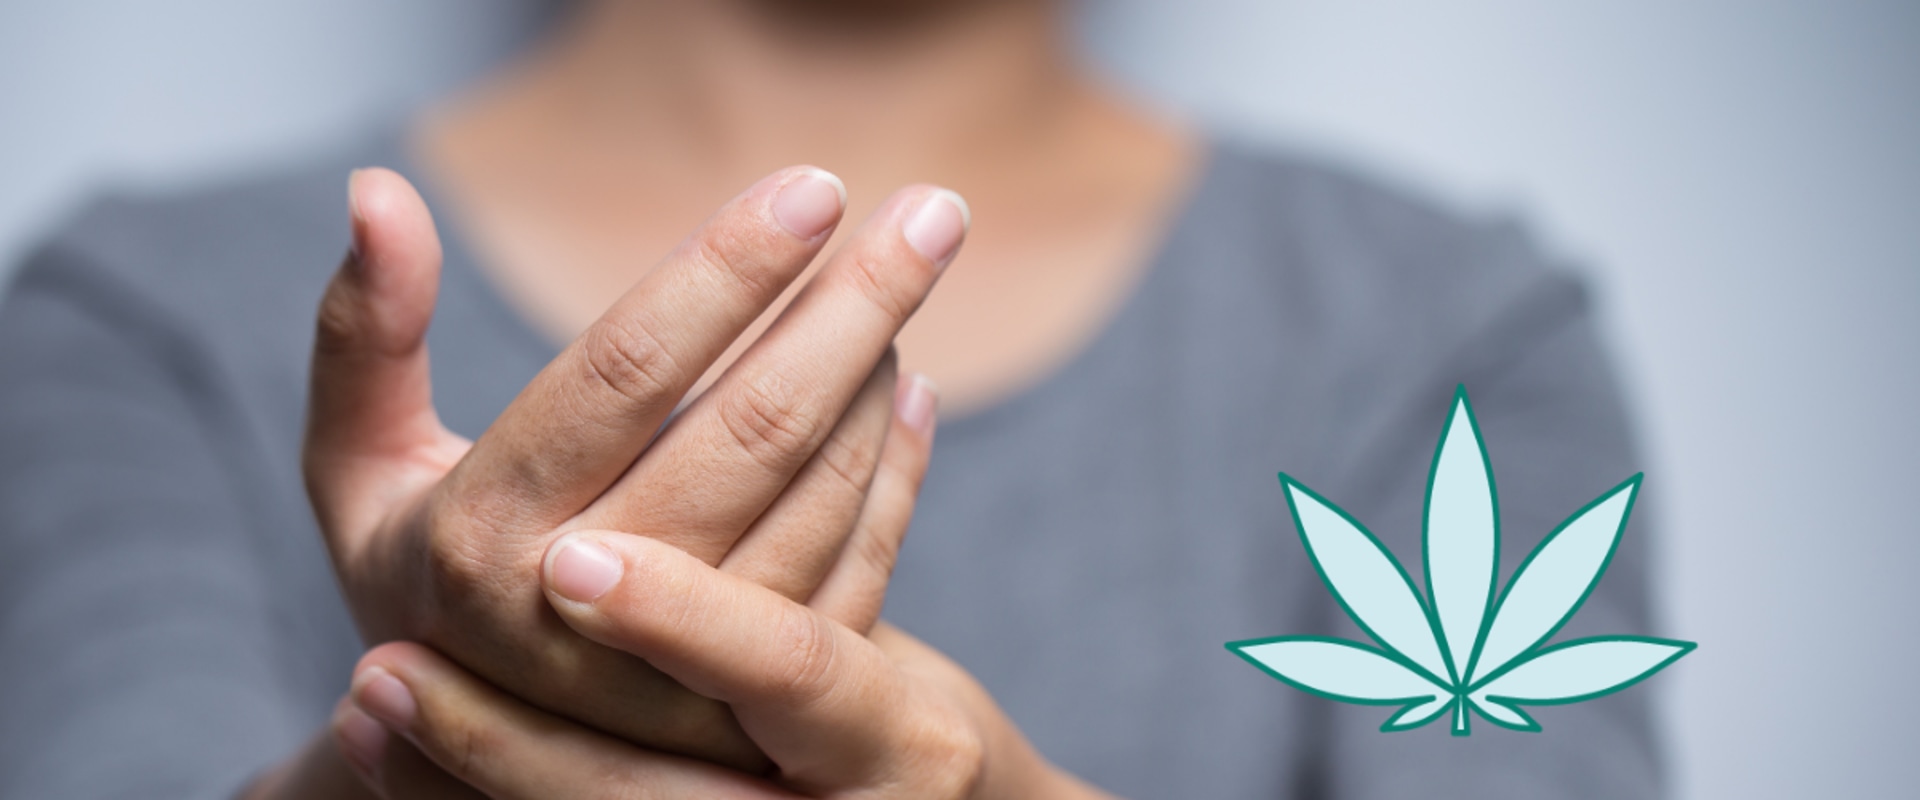 Can thc help with neuropathy?